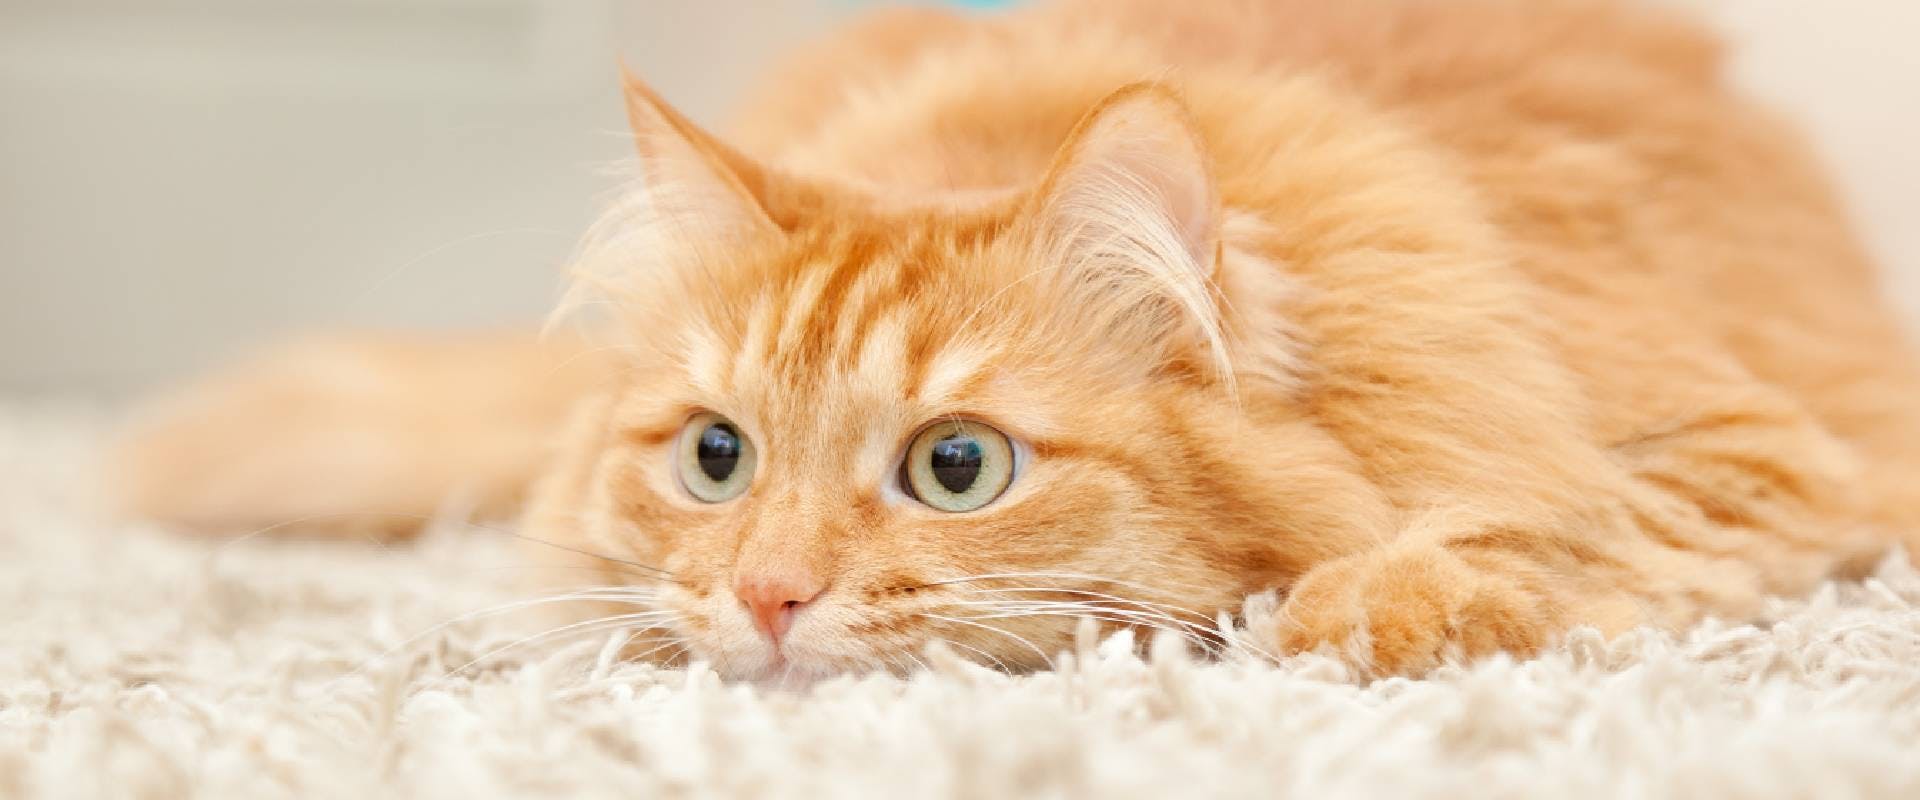 Ginger tabby cat laying on a cream rug